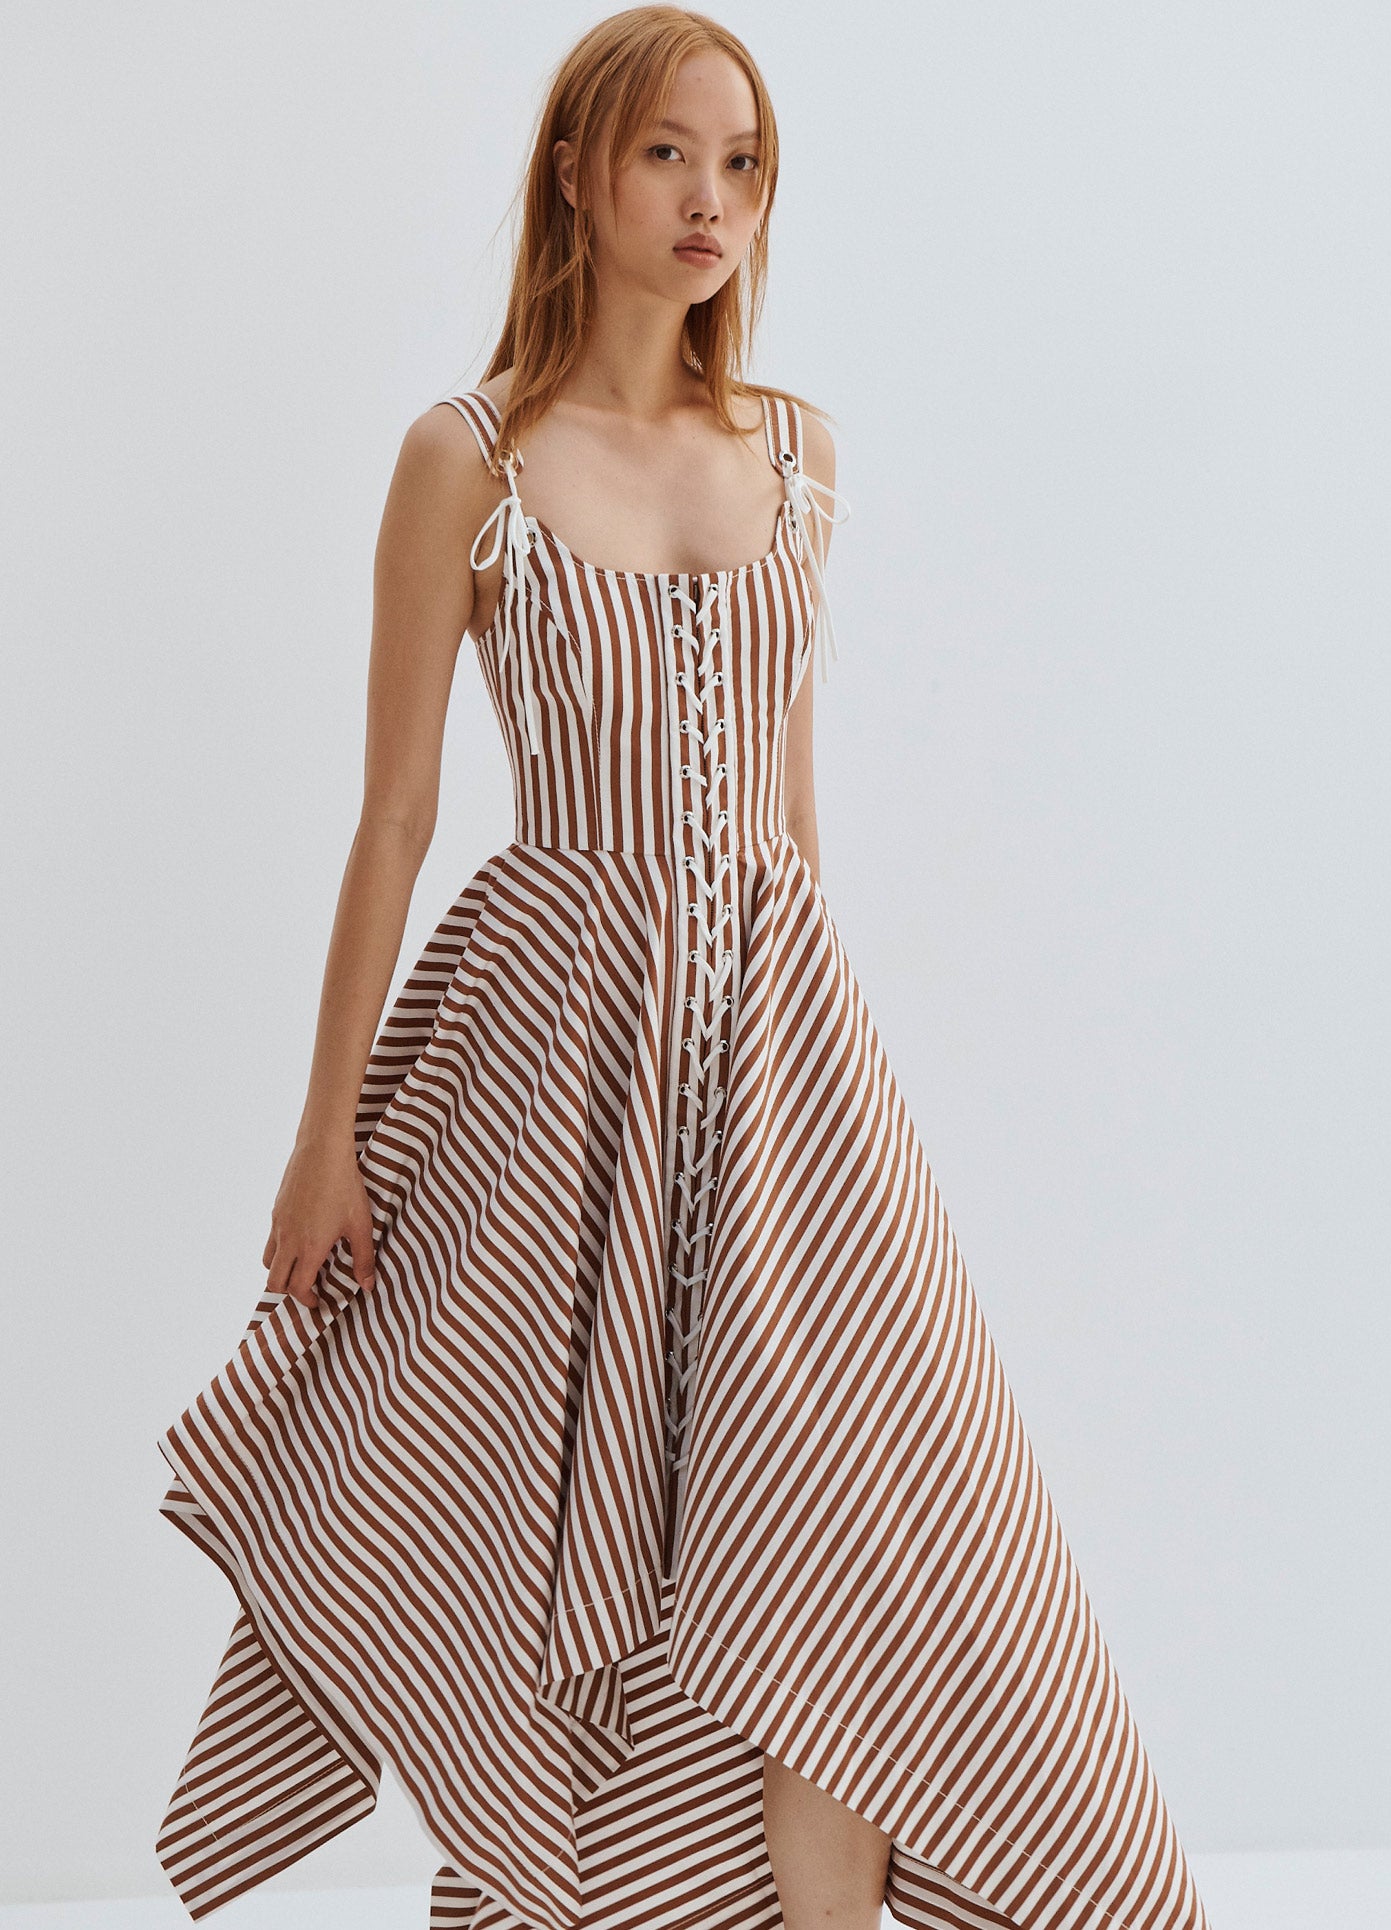 MONSE Striped Laced Front Sleeveless Dress in Brown and Ivory on Model Front View